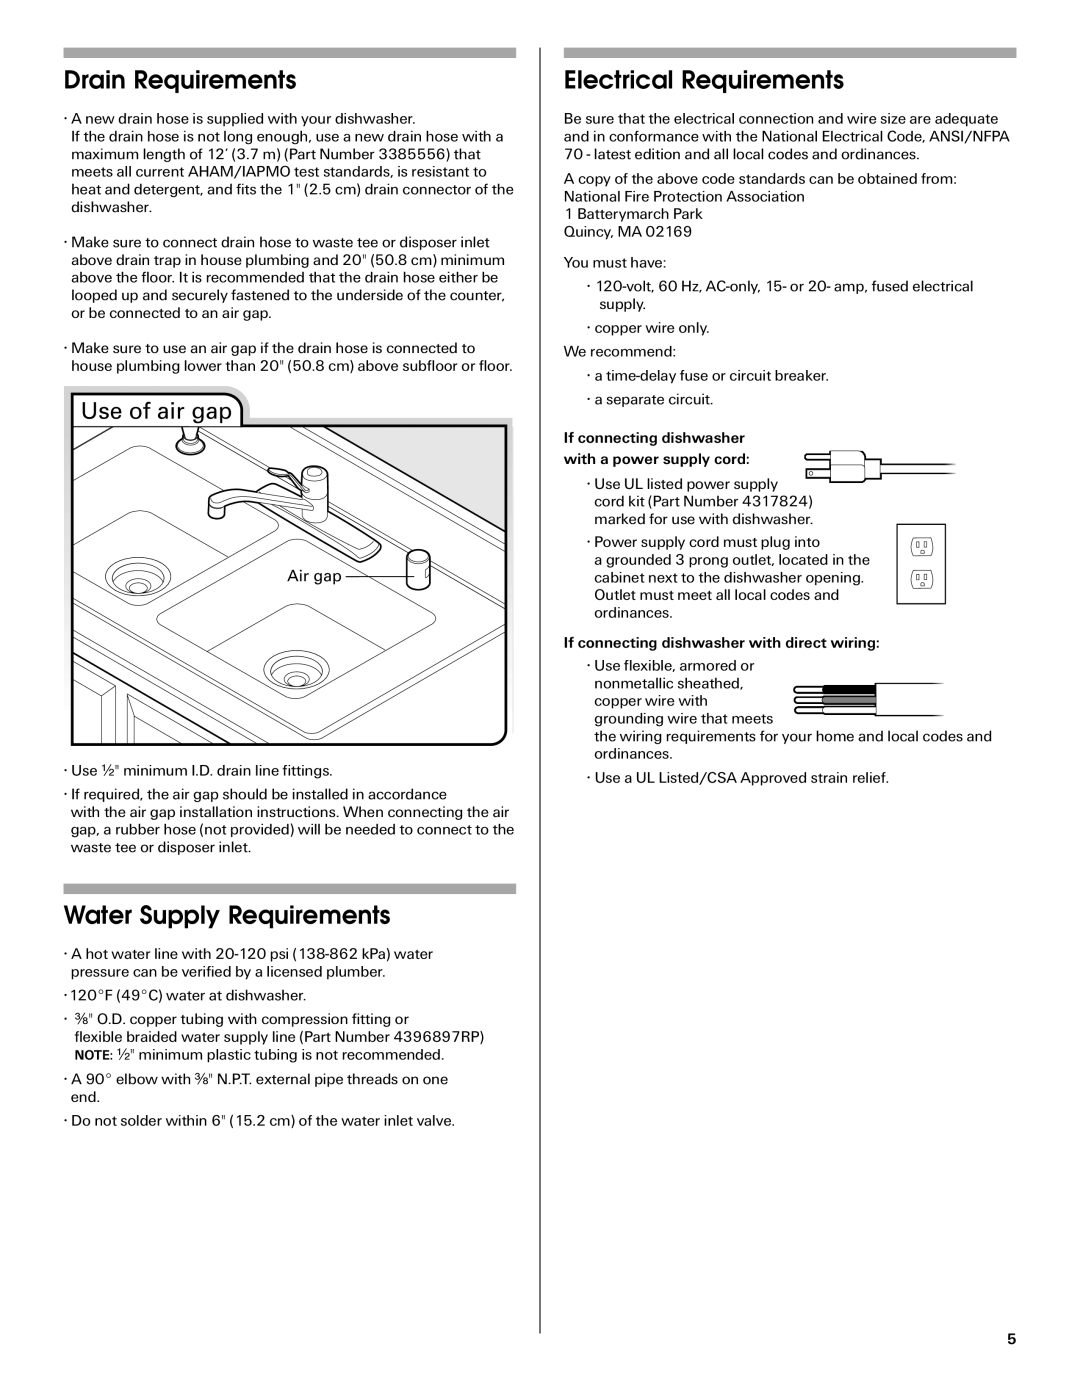 Maytag W10282553A Drain Requirements, Water Supply Requirements, Electrical Requirements, Use of air gap 